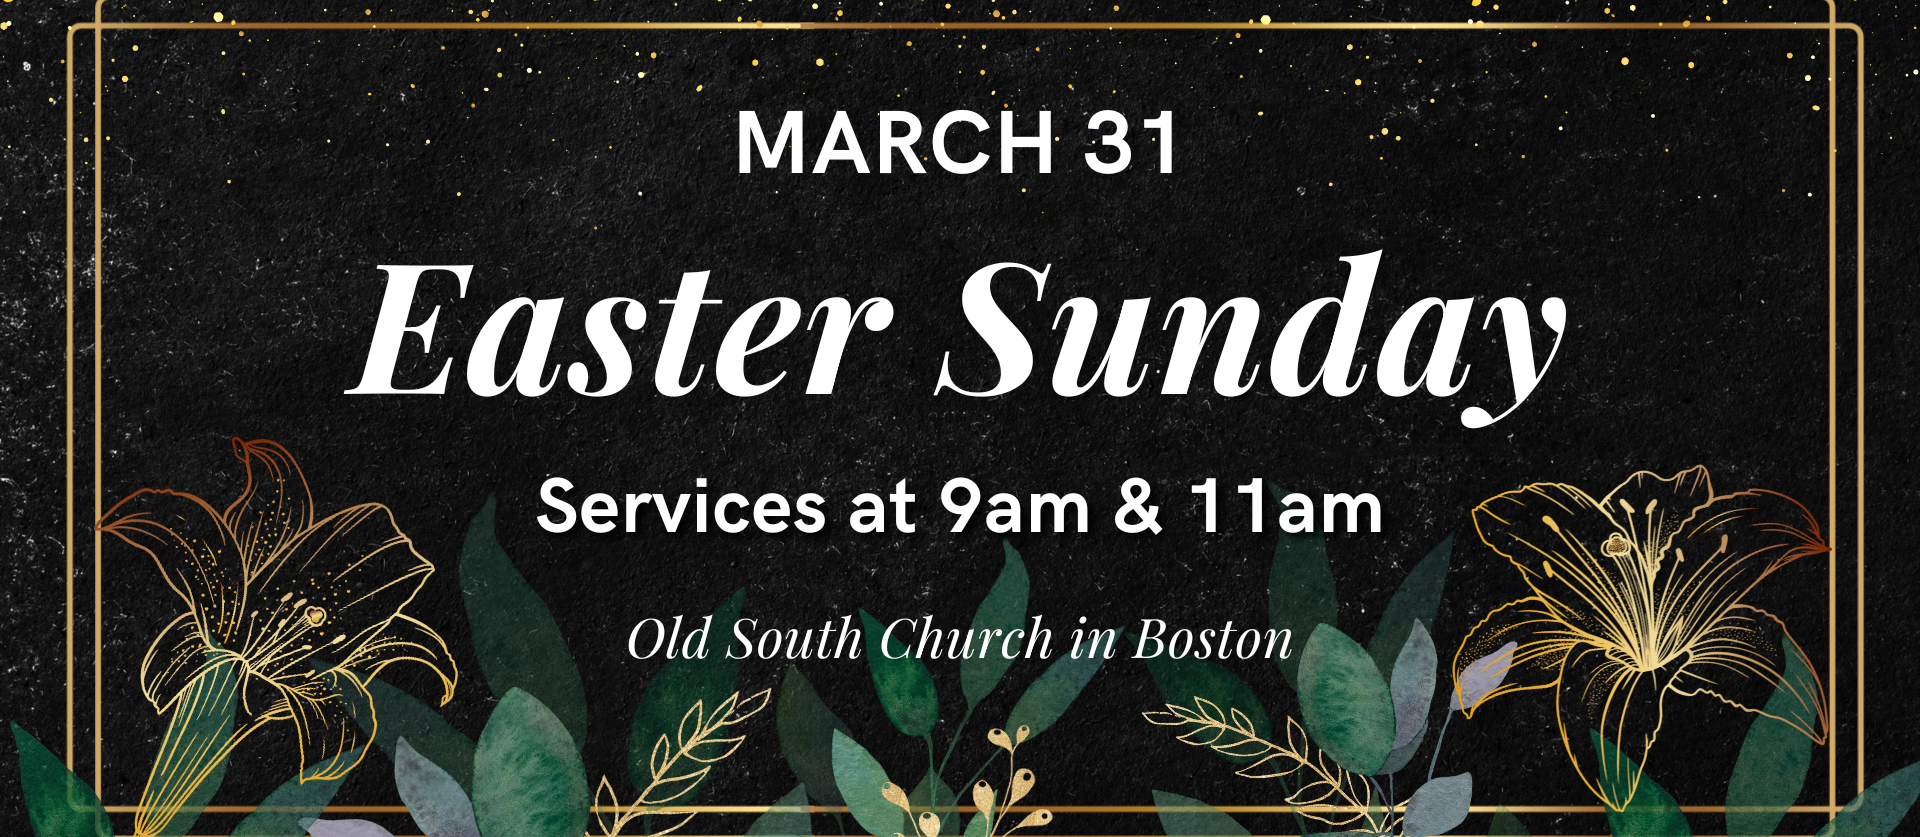 Easter Sunday March 31 at 9am and 11am